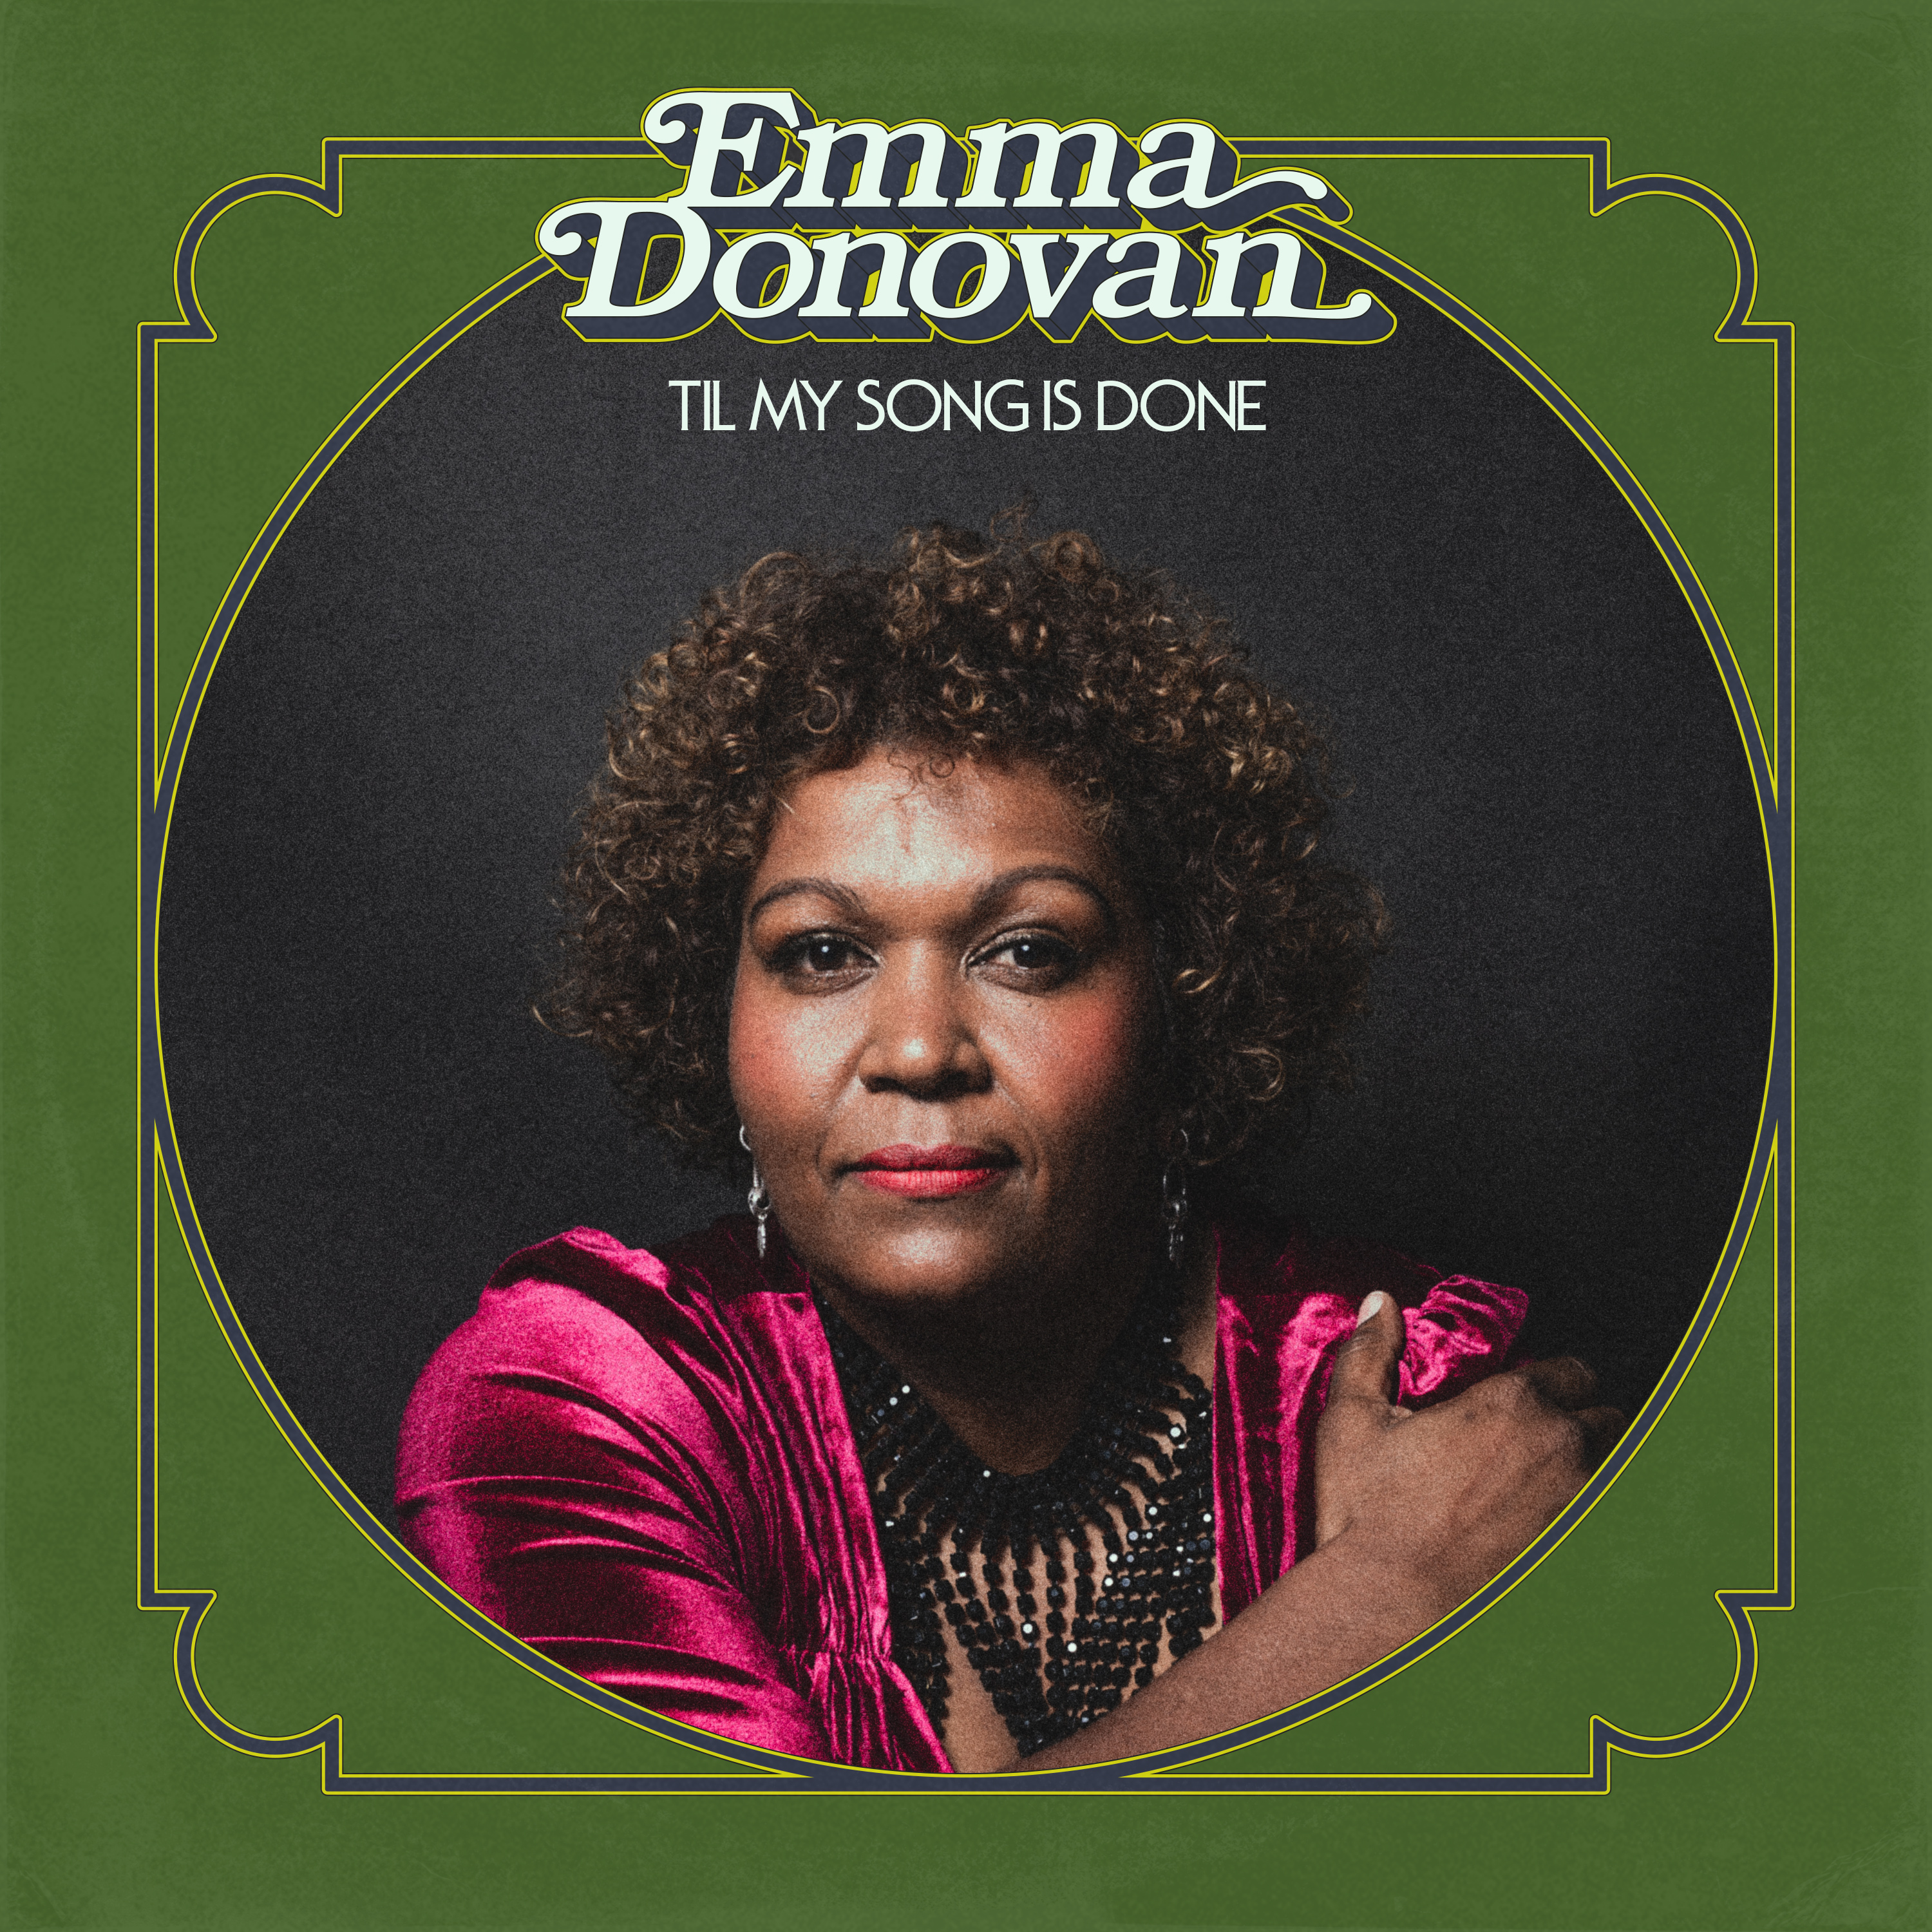 Portrait of singer Emma Donovan on the cover of her album Til My Song Is Done